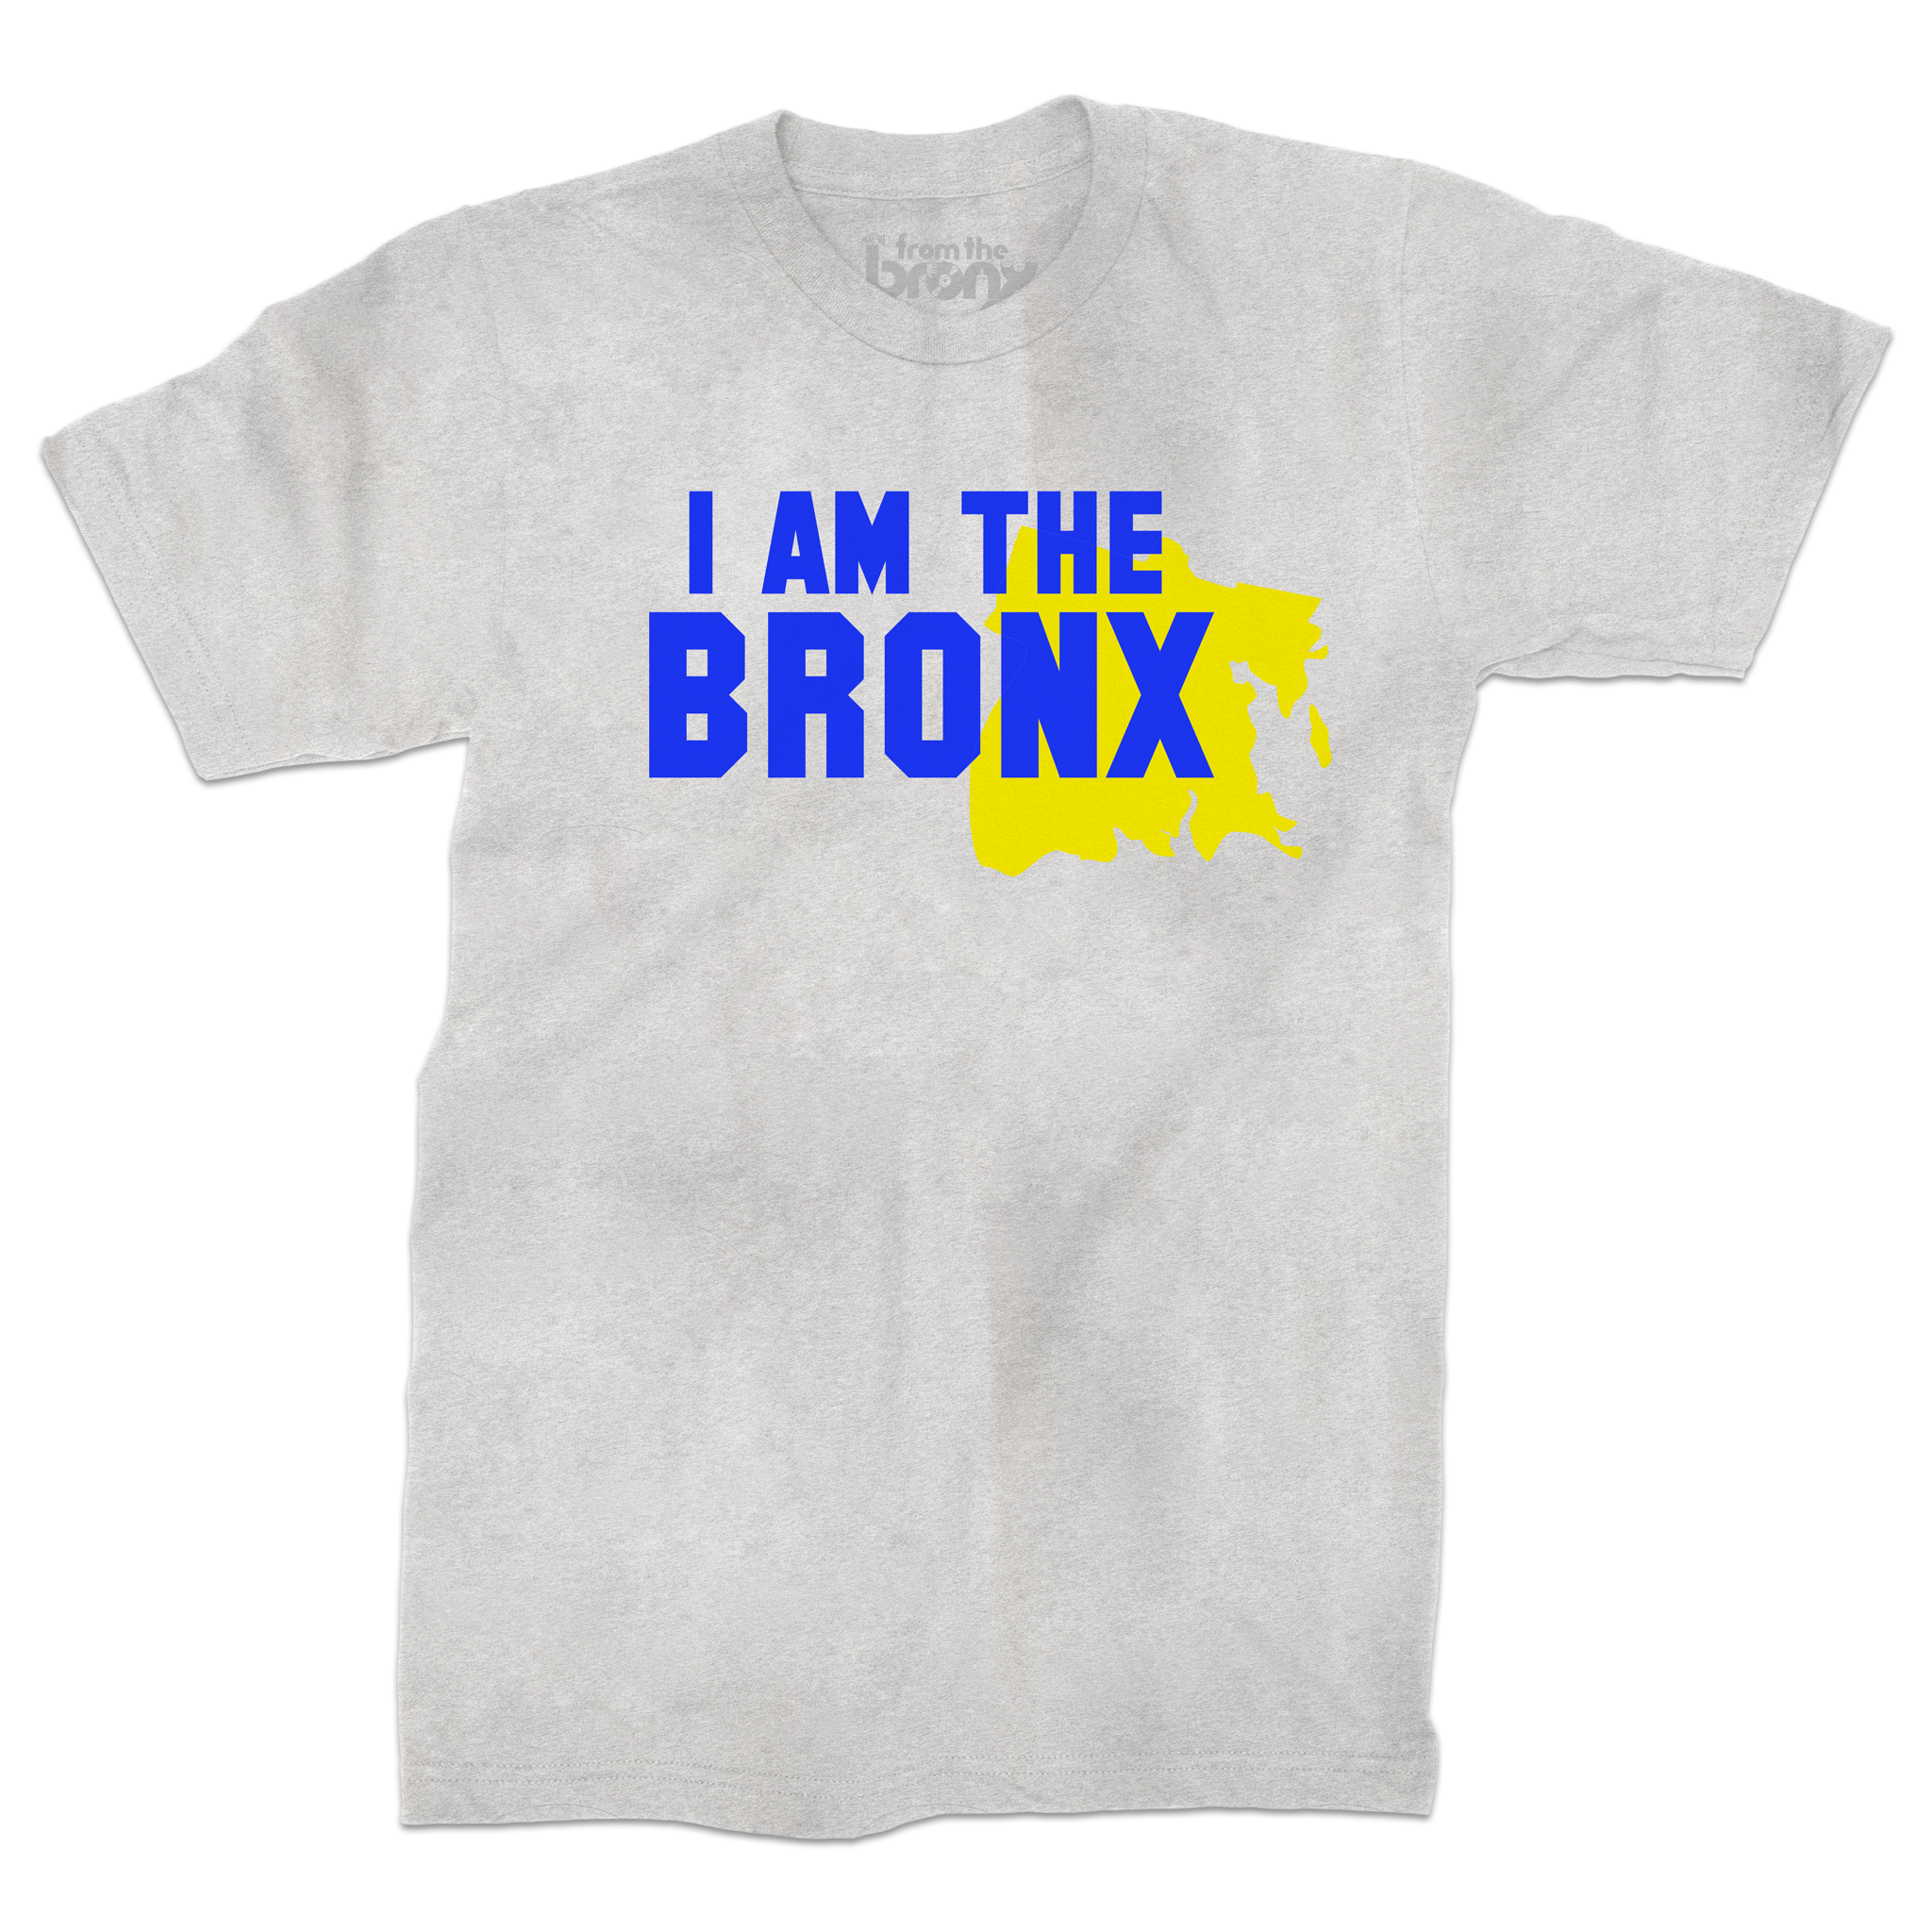 I AM THE BRONX T-Shirt Front in Heather Gray